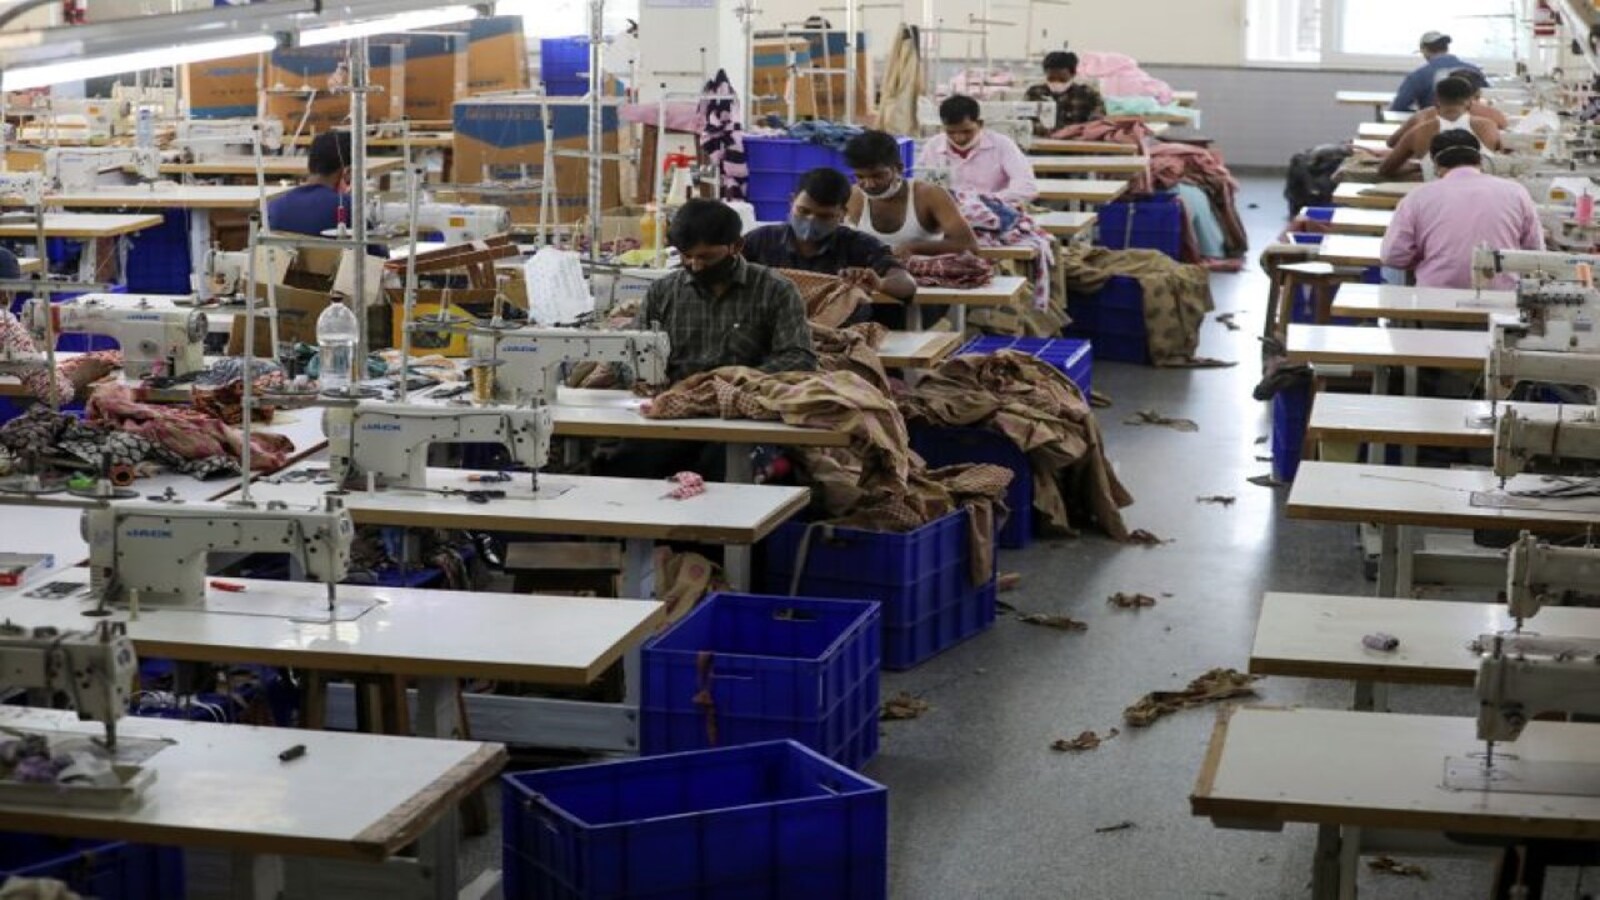 PLI scheme: Government eyes 2nd edition for textile industry in garments &  apparel segment; KPR Mills, Vardhman Textiles, others gain